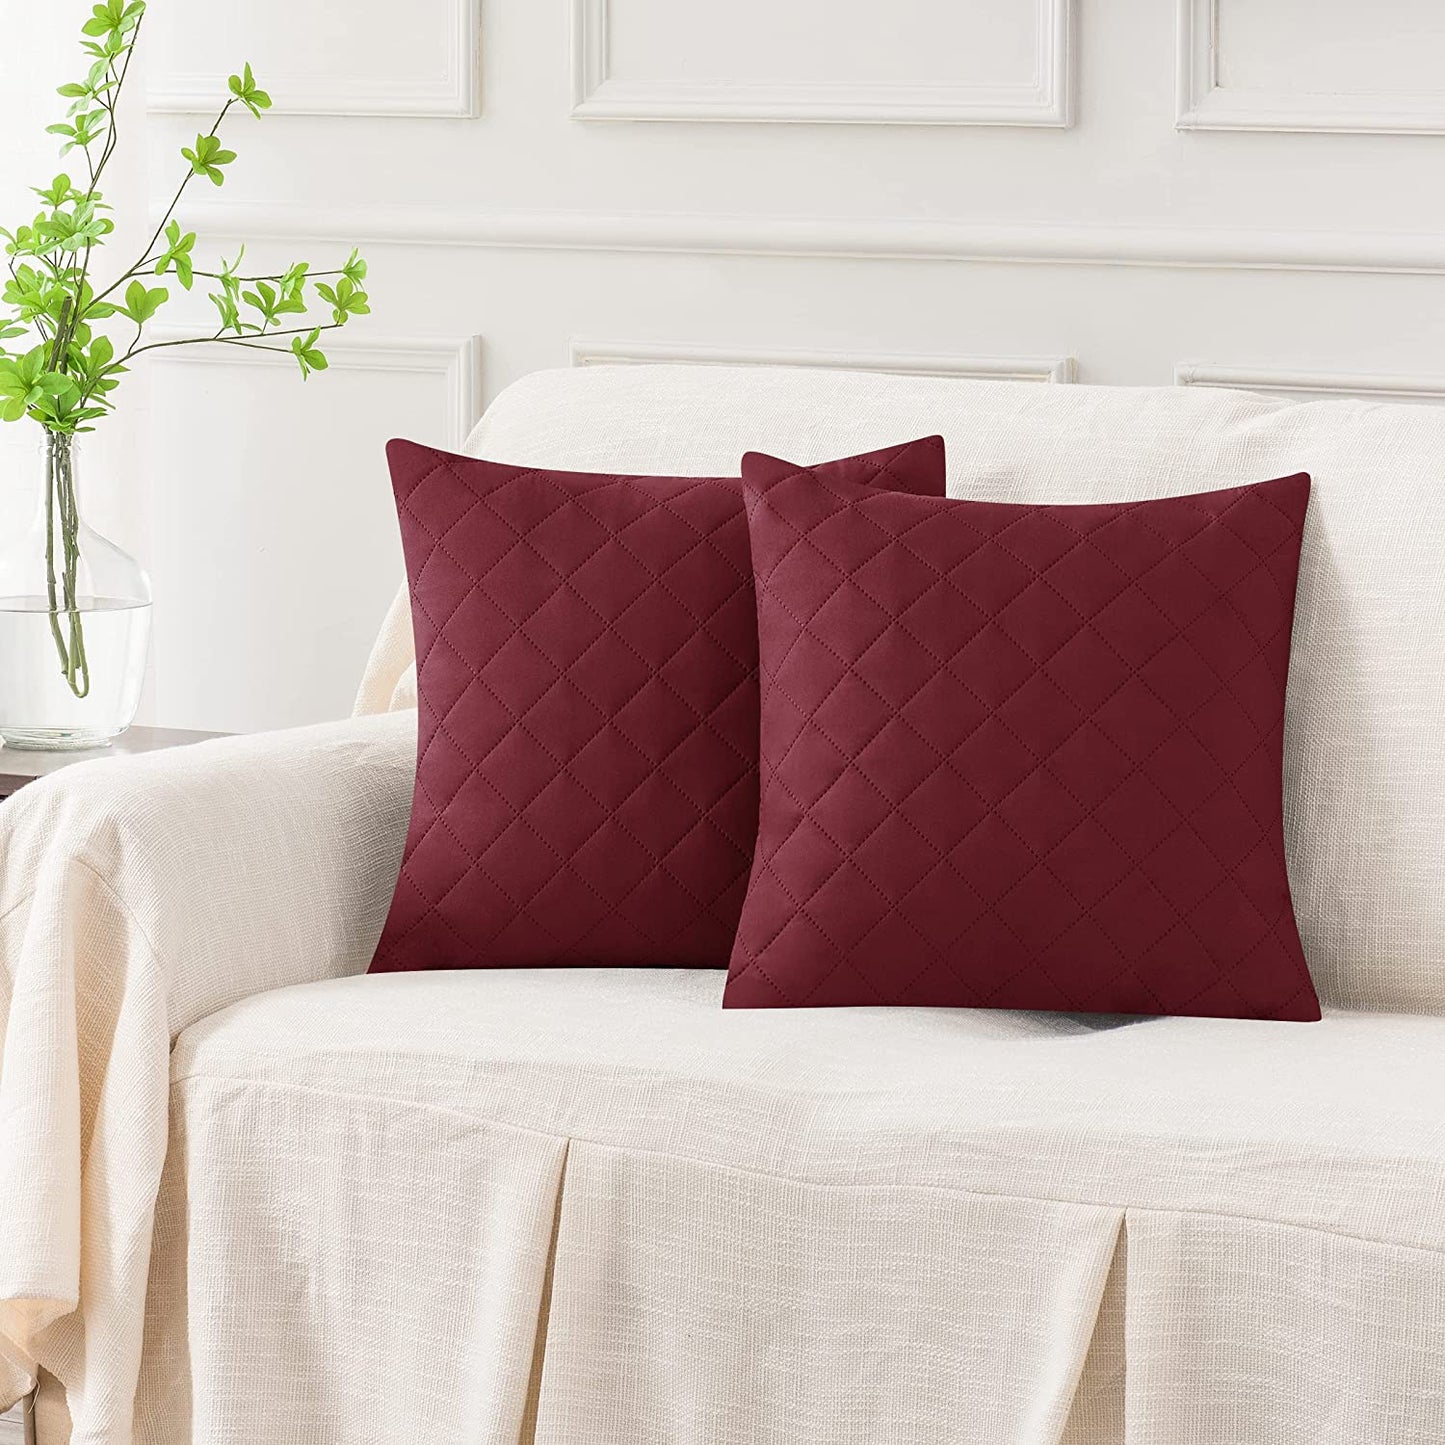 Quilted Cushion Cover Square Pattren 16"x16"Maroon